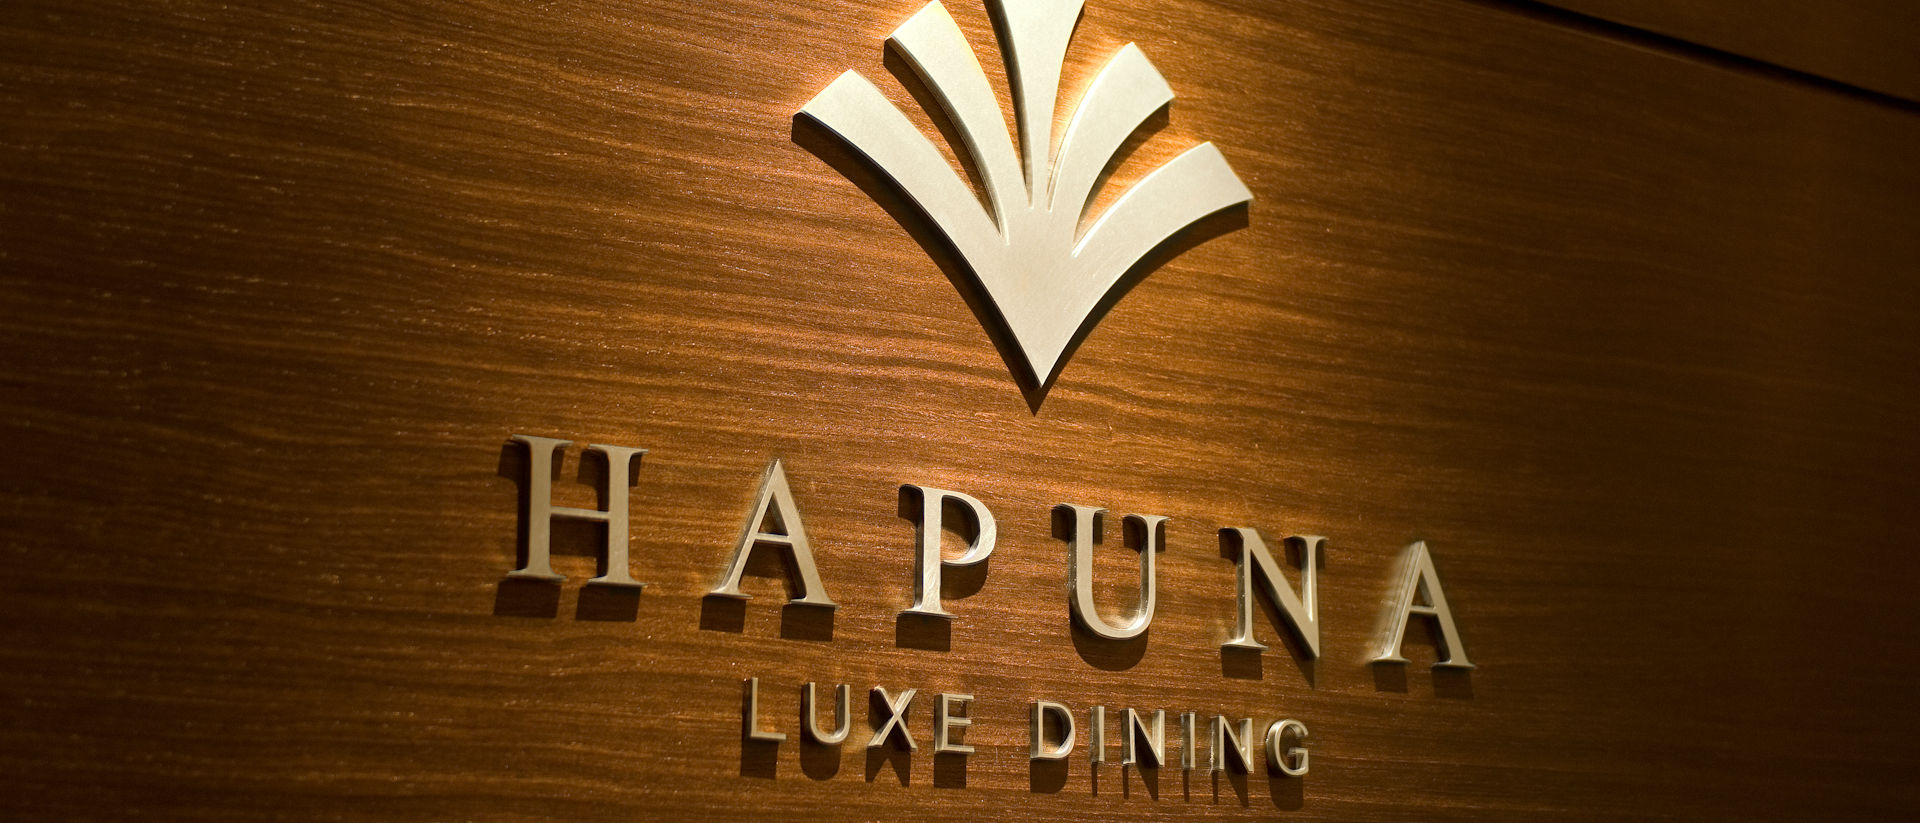 LUXE DINING HAPUNA